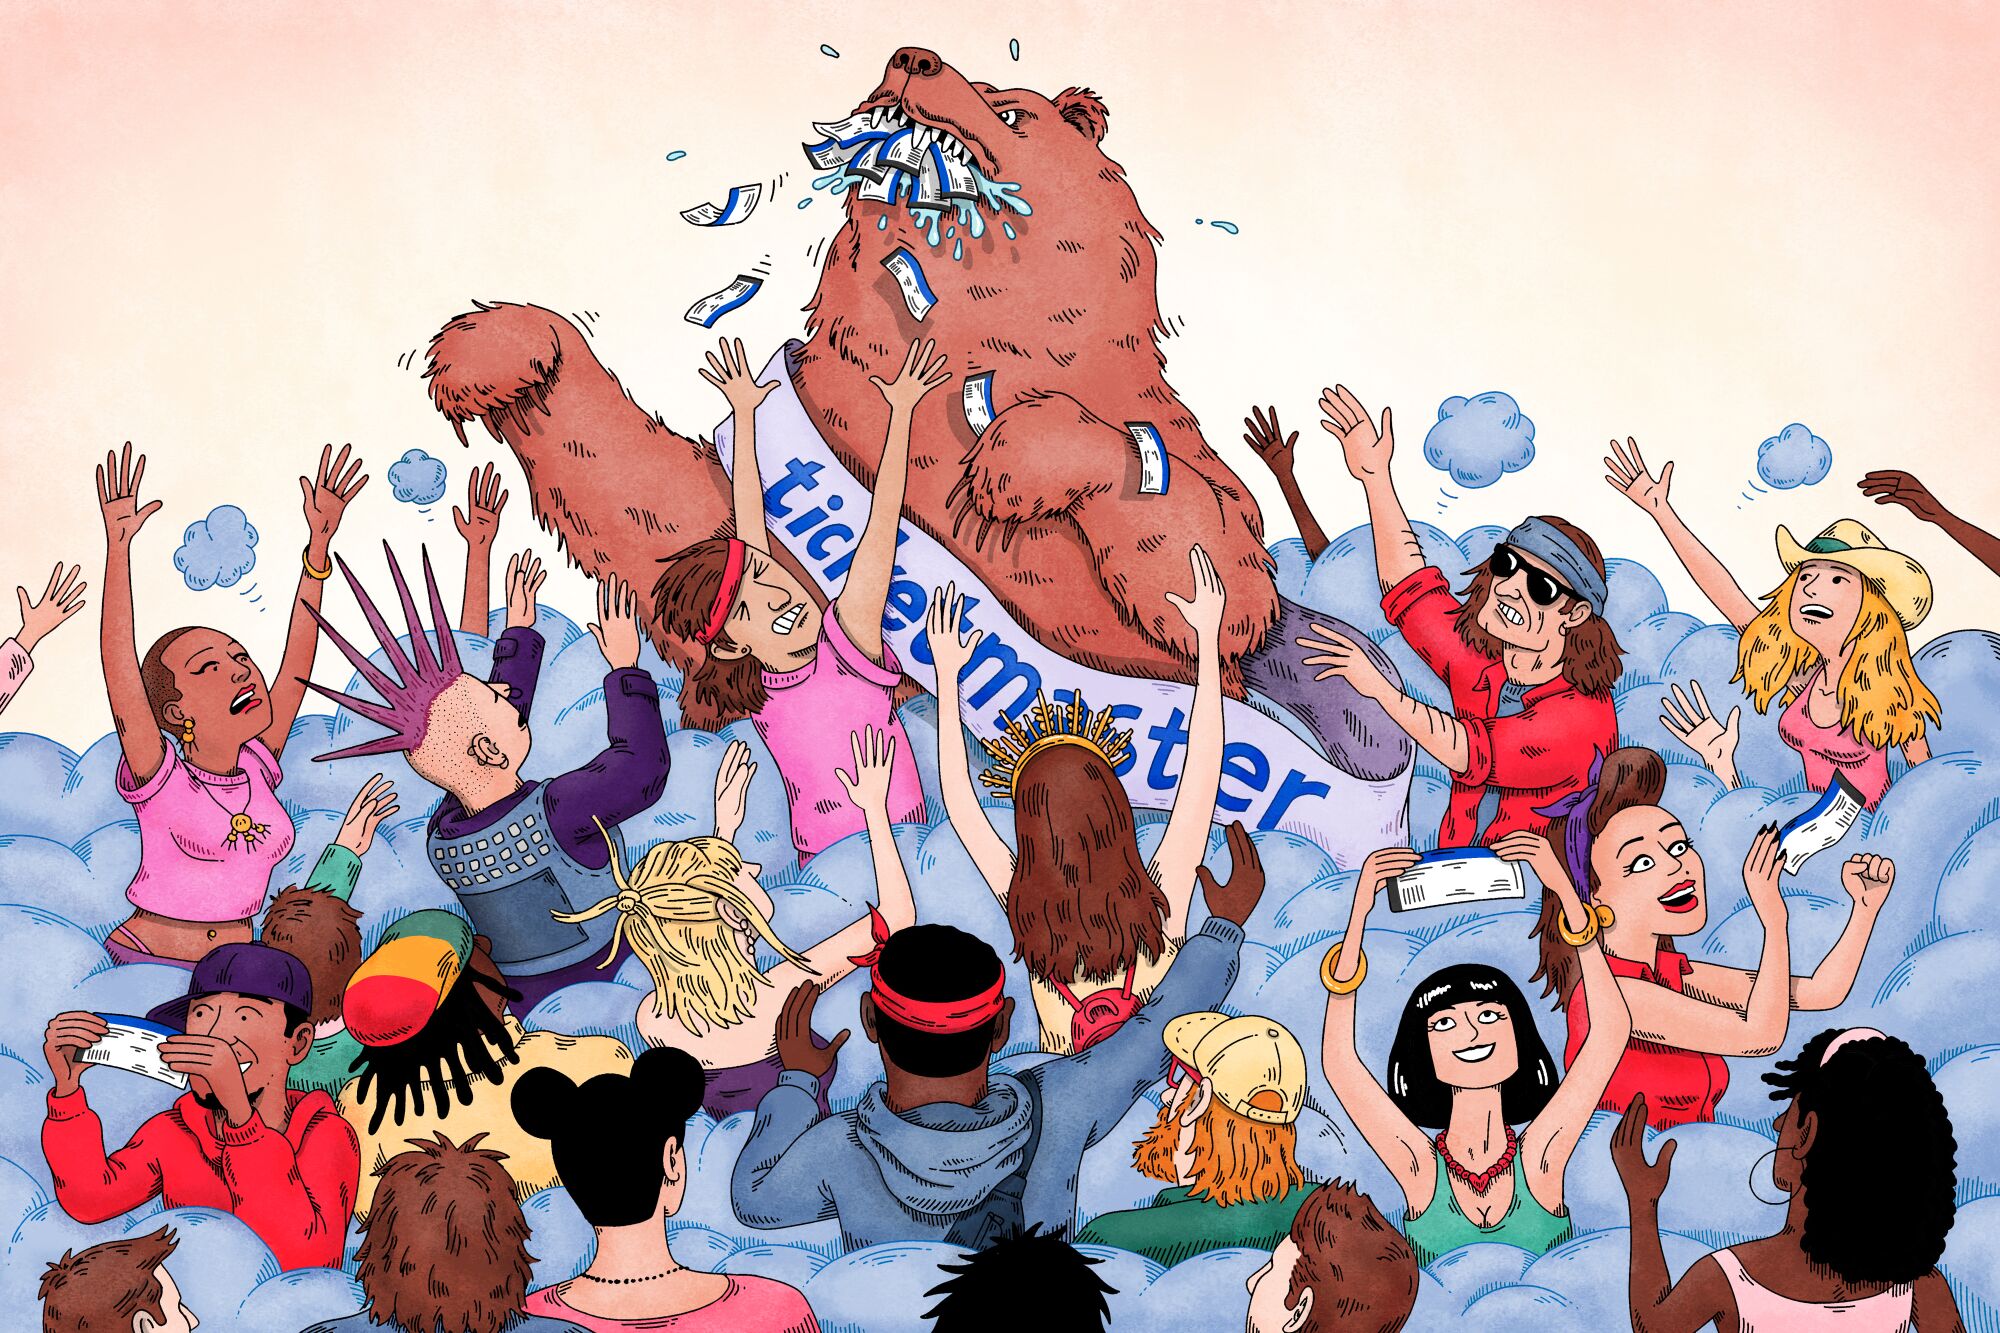 Illustration of a bear wearing a Ticketmaster sash and mauling fans. Around it, fans fight for concert tickets.